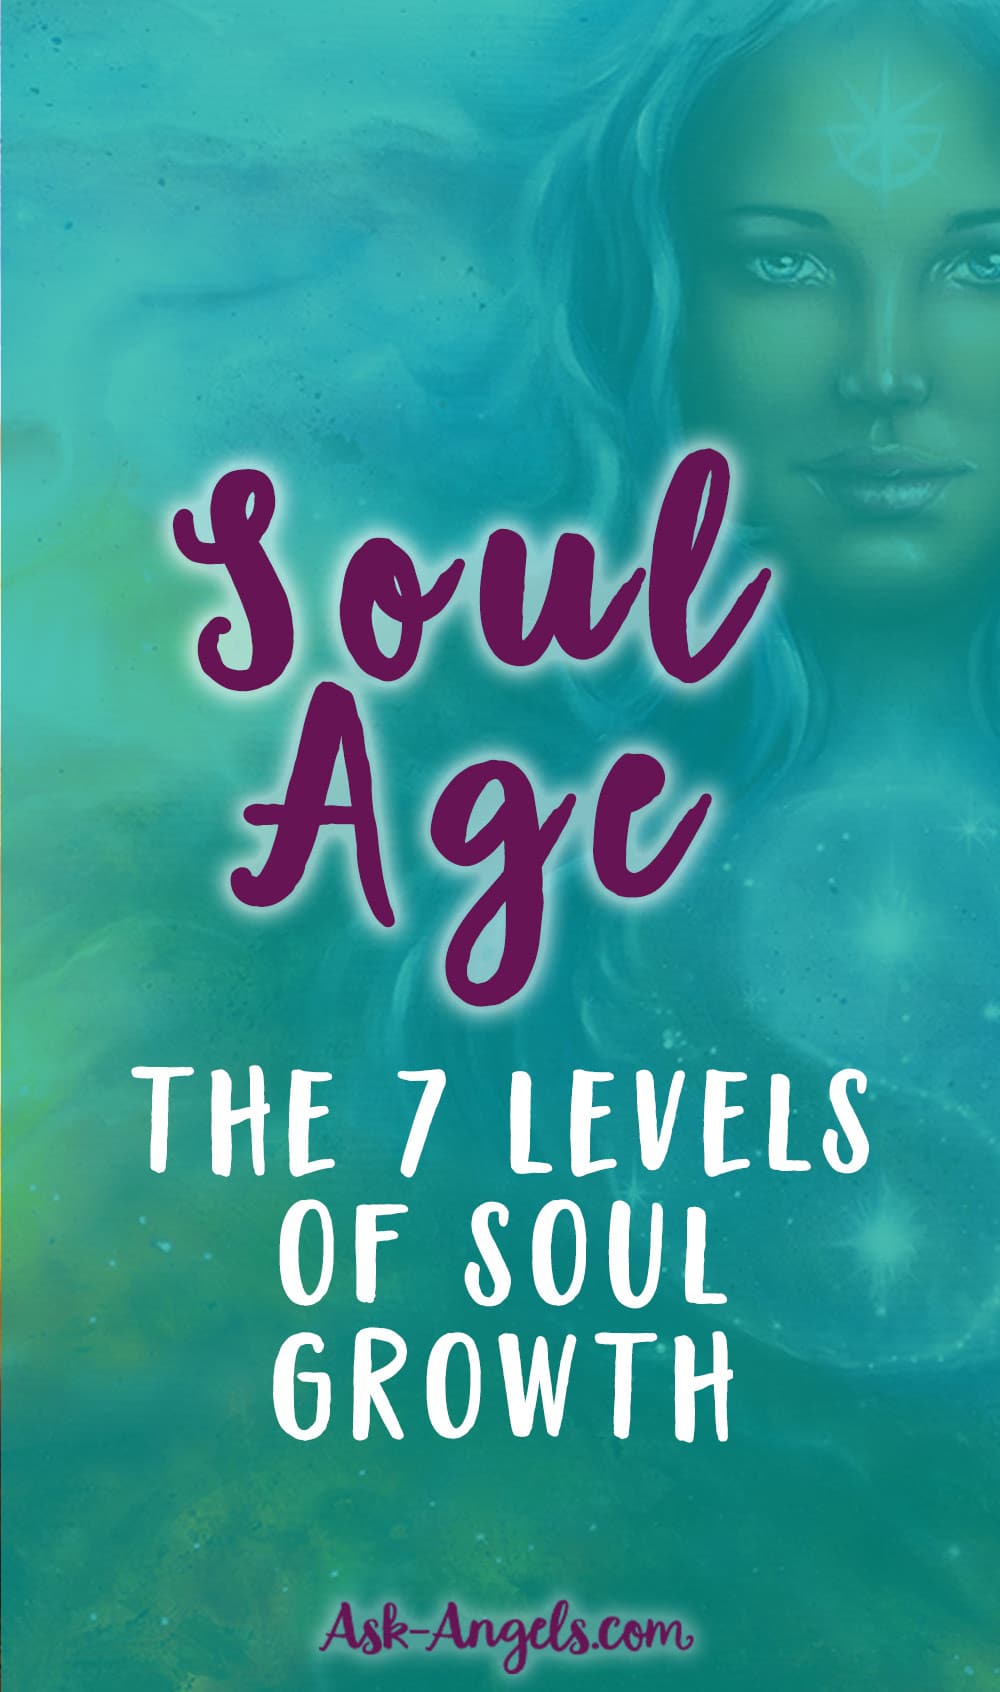 Soul Age- The 7 Levels of Soul Growth